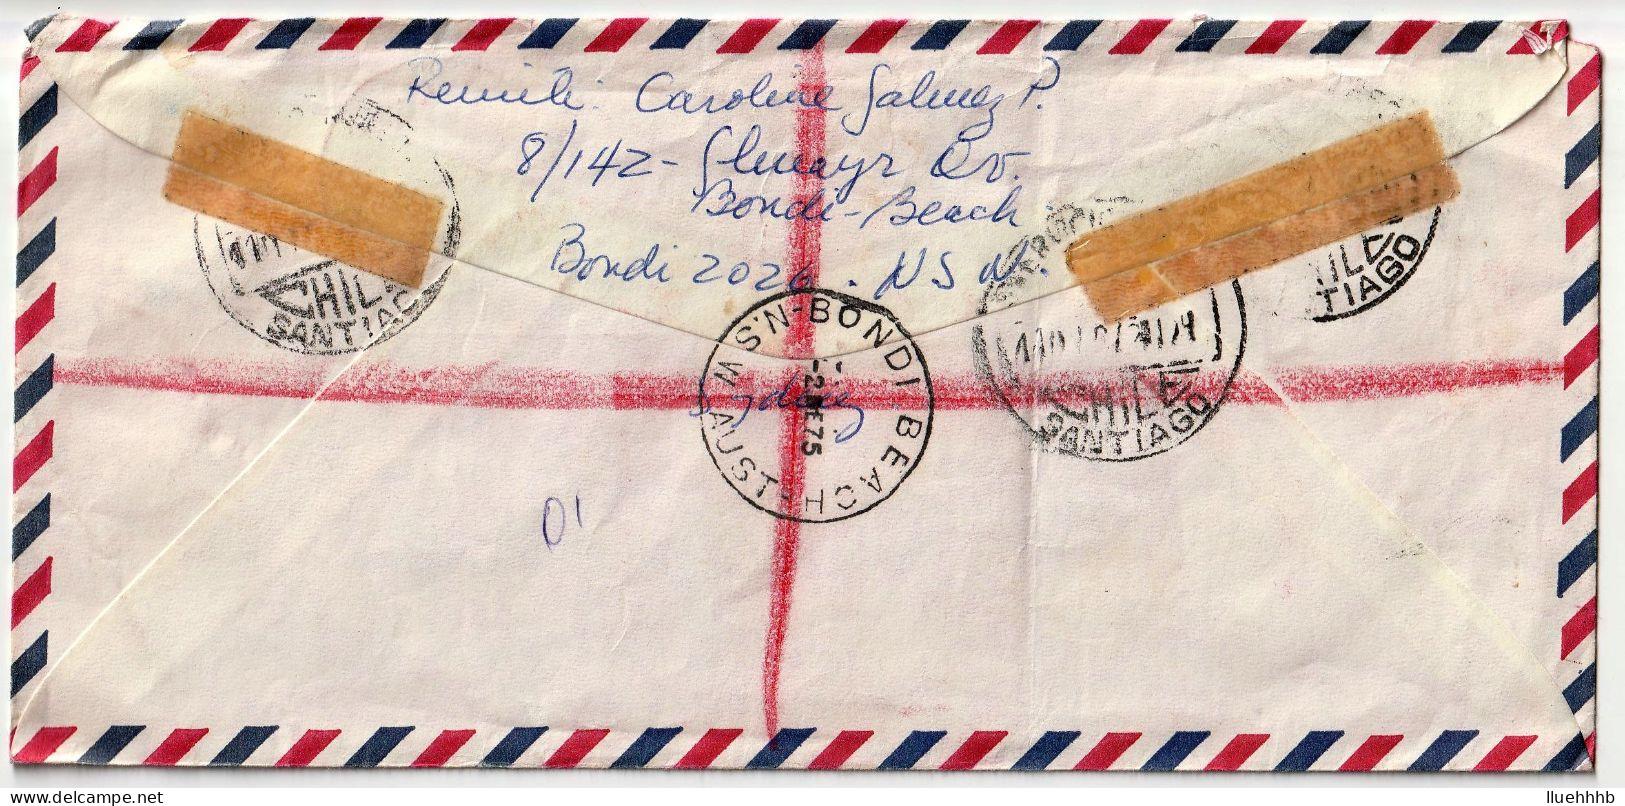 AUSTRALIA: 1975 Registered Airmail Cover To CHILE, $2.90 Rate - Covers & Documents